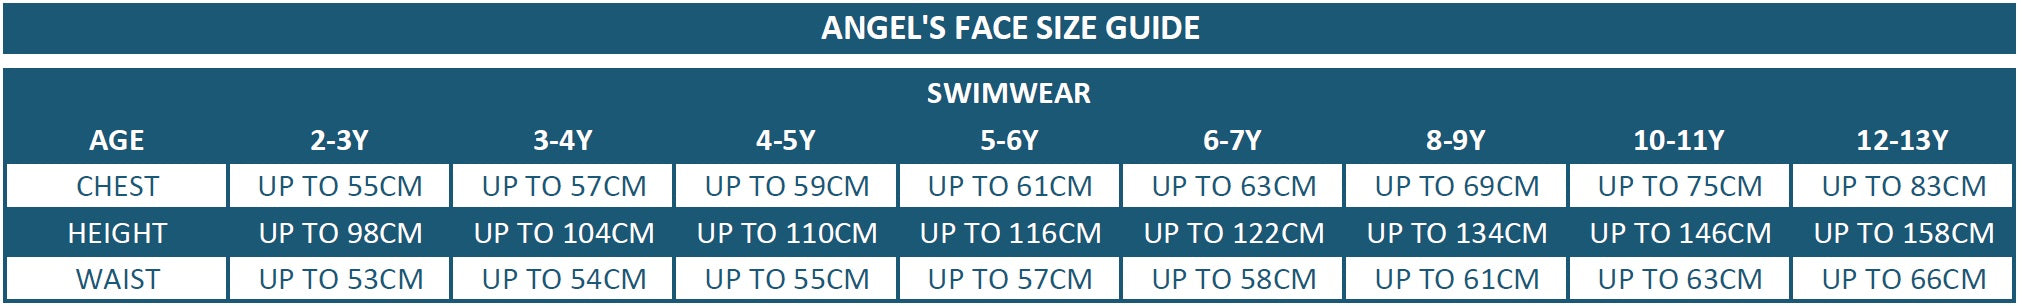 Angels Face Size Guide